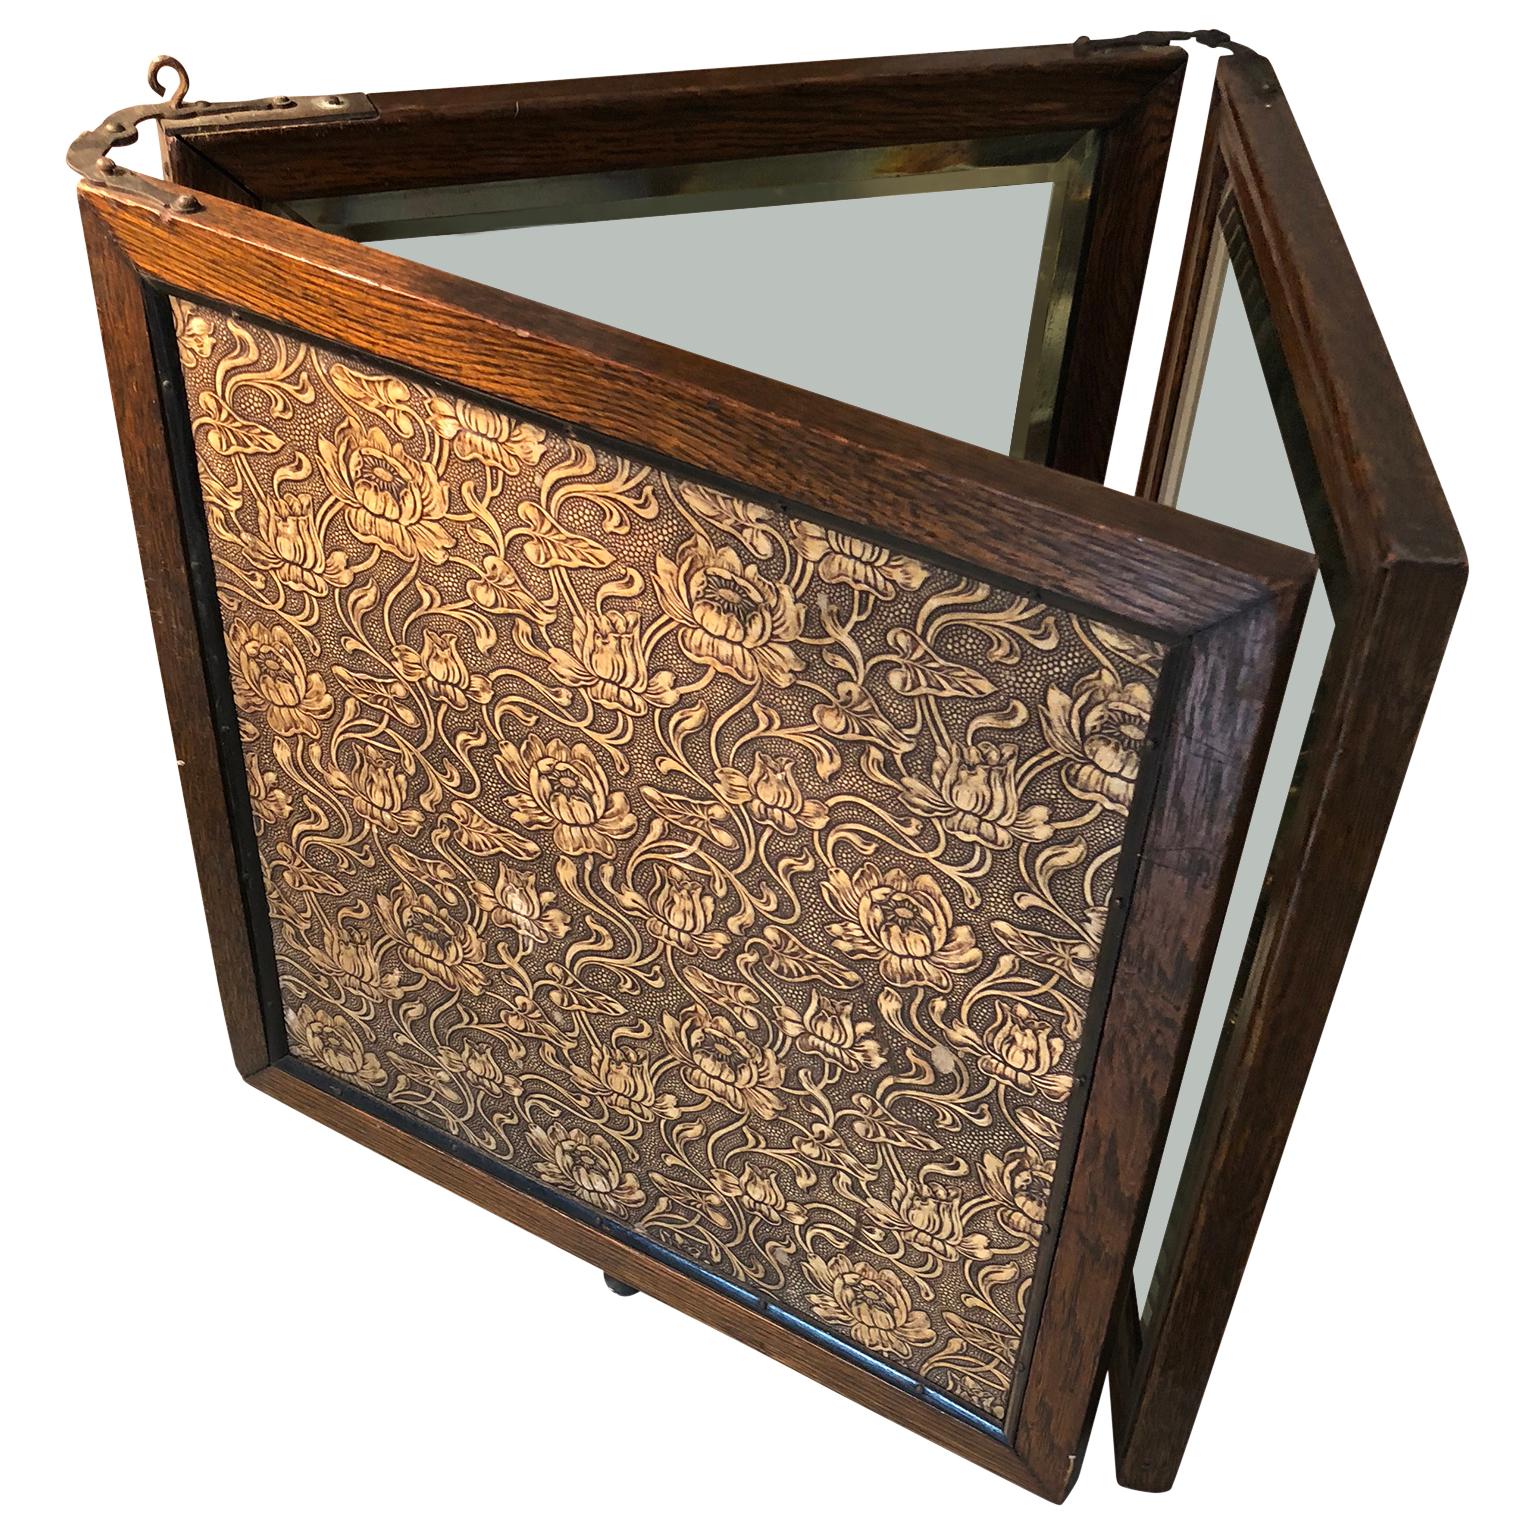 British Tri-Fold Travel Vanity or Dresser Mirror with Beveled Glass For Sale